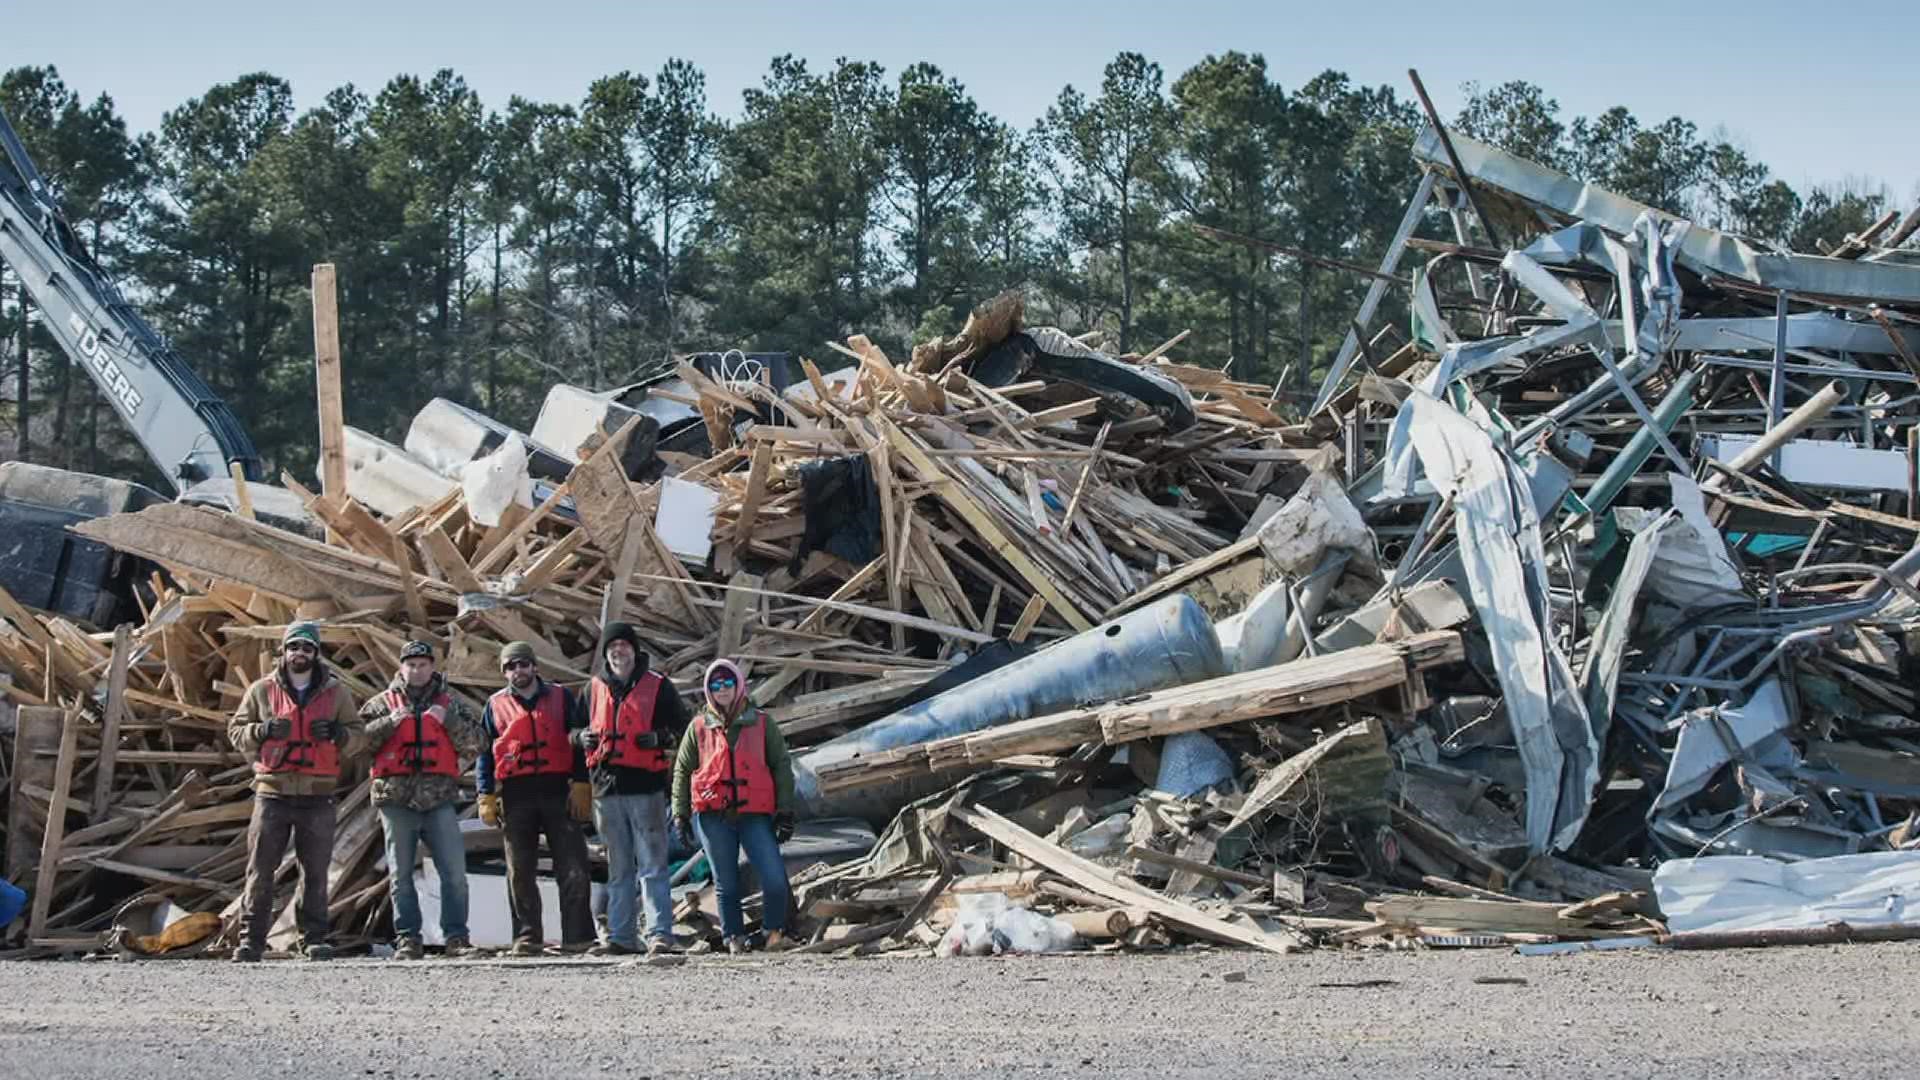 A team from Living Lands and Waters has been assisting in a lake cleanup since Dec. 23, after a devastating tornado ripped through the region.